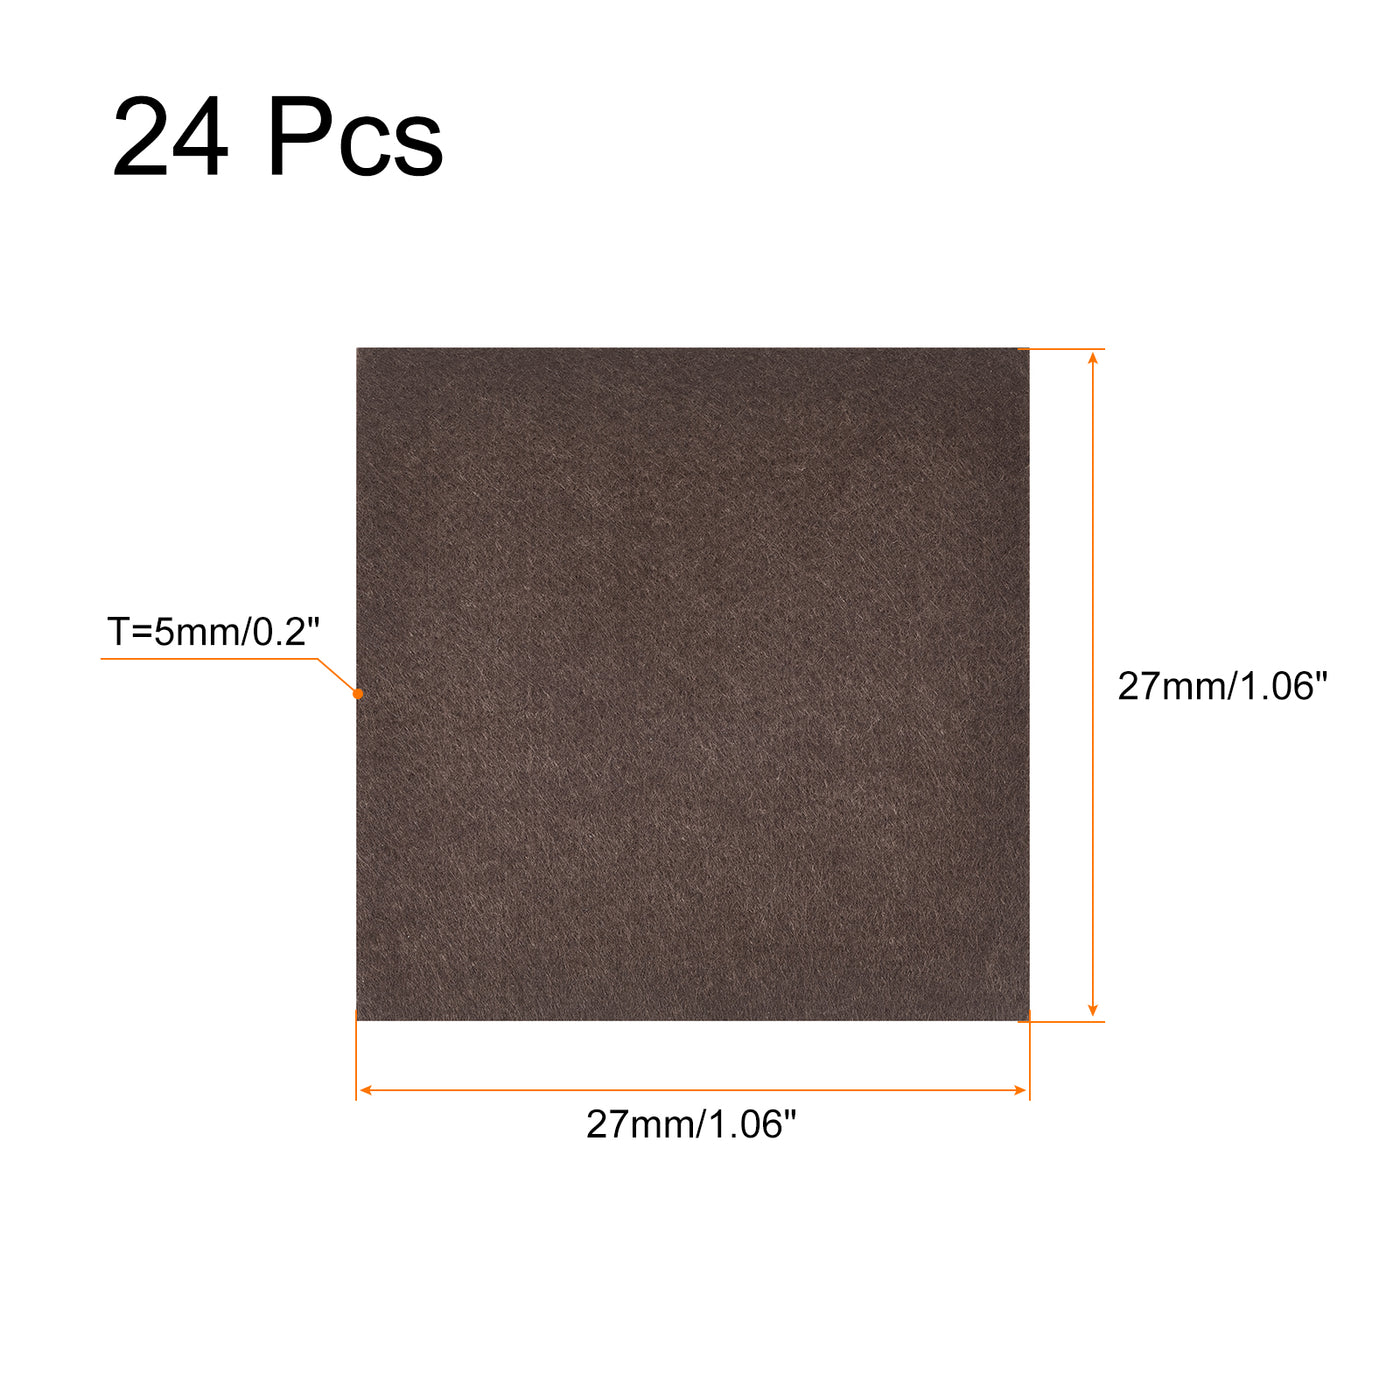 uxcell Uxcell Felt Furniture Pads, 27mm x 27mm Self Adhesive Square Floor Protectors for Furniture Legs Hardwood Floor, Brown 24Pcs